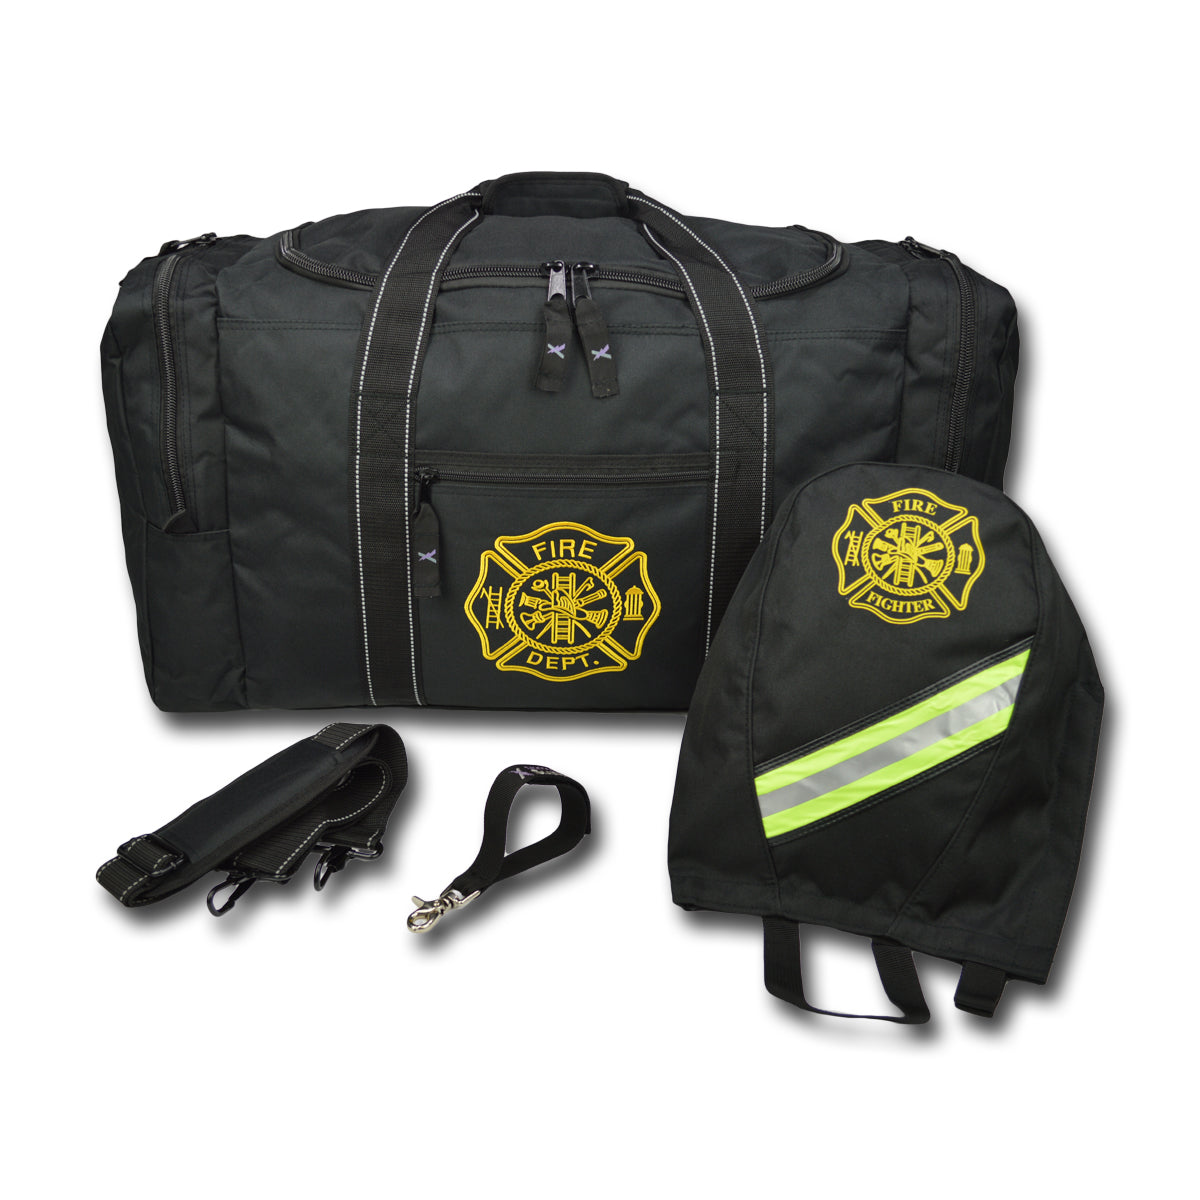 Lightning X Products strives to give you the absolute most amount of product for the least amount of money. This bundle is a great starter kit and the savings are even better over buying each item separately. The FB40 gives you nearly all of the same features as our deluxe gear bags but at nearly half the price.